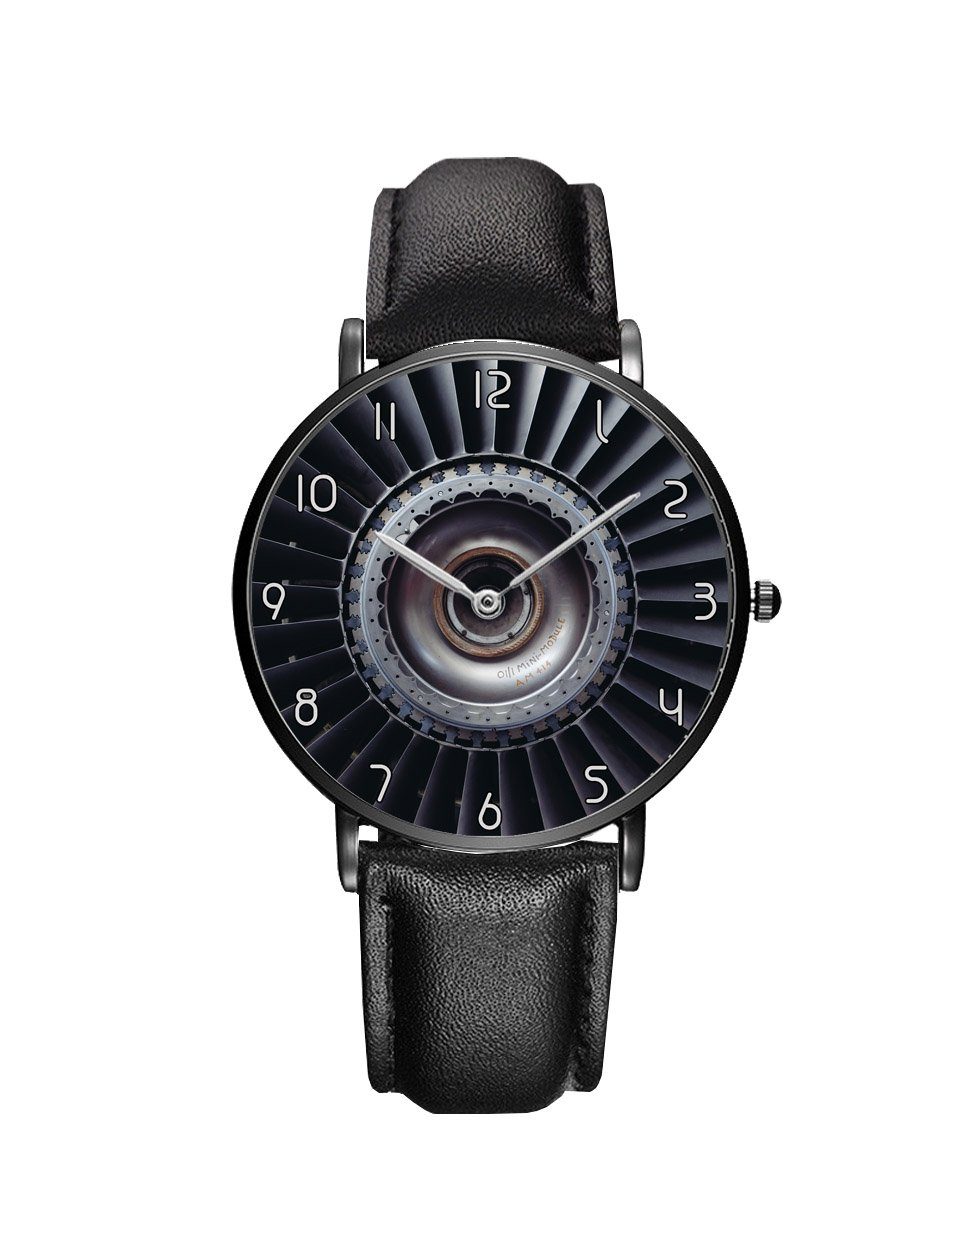 Real Jet Engine Printed Leather Strap Watches Aviation Shop Black & Black Leather Strap 